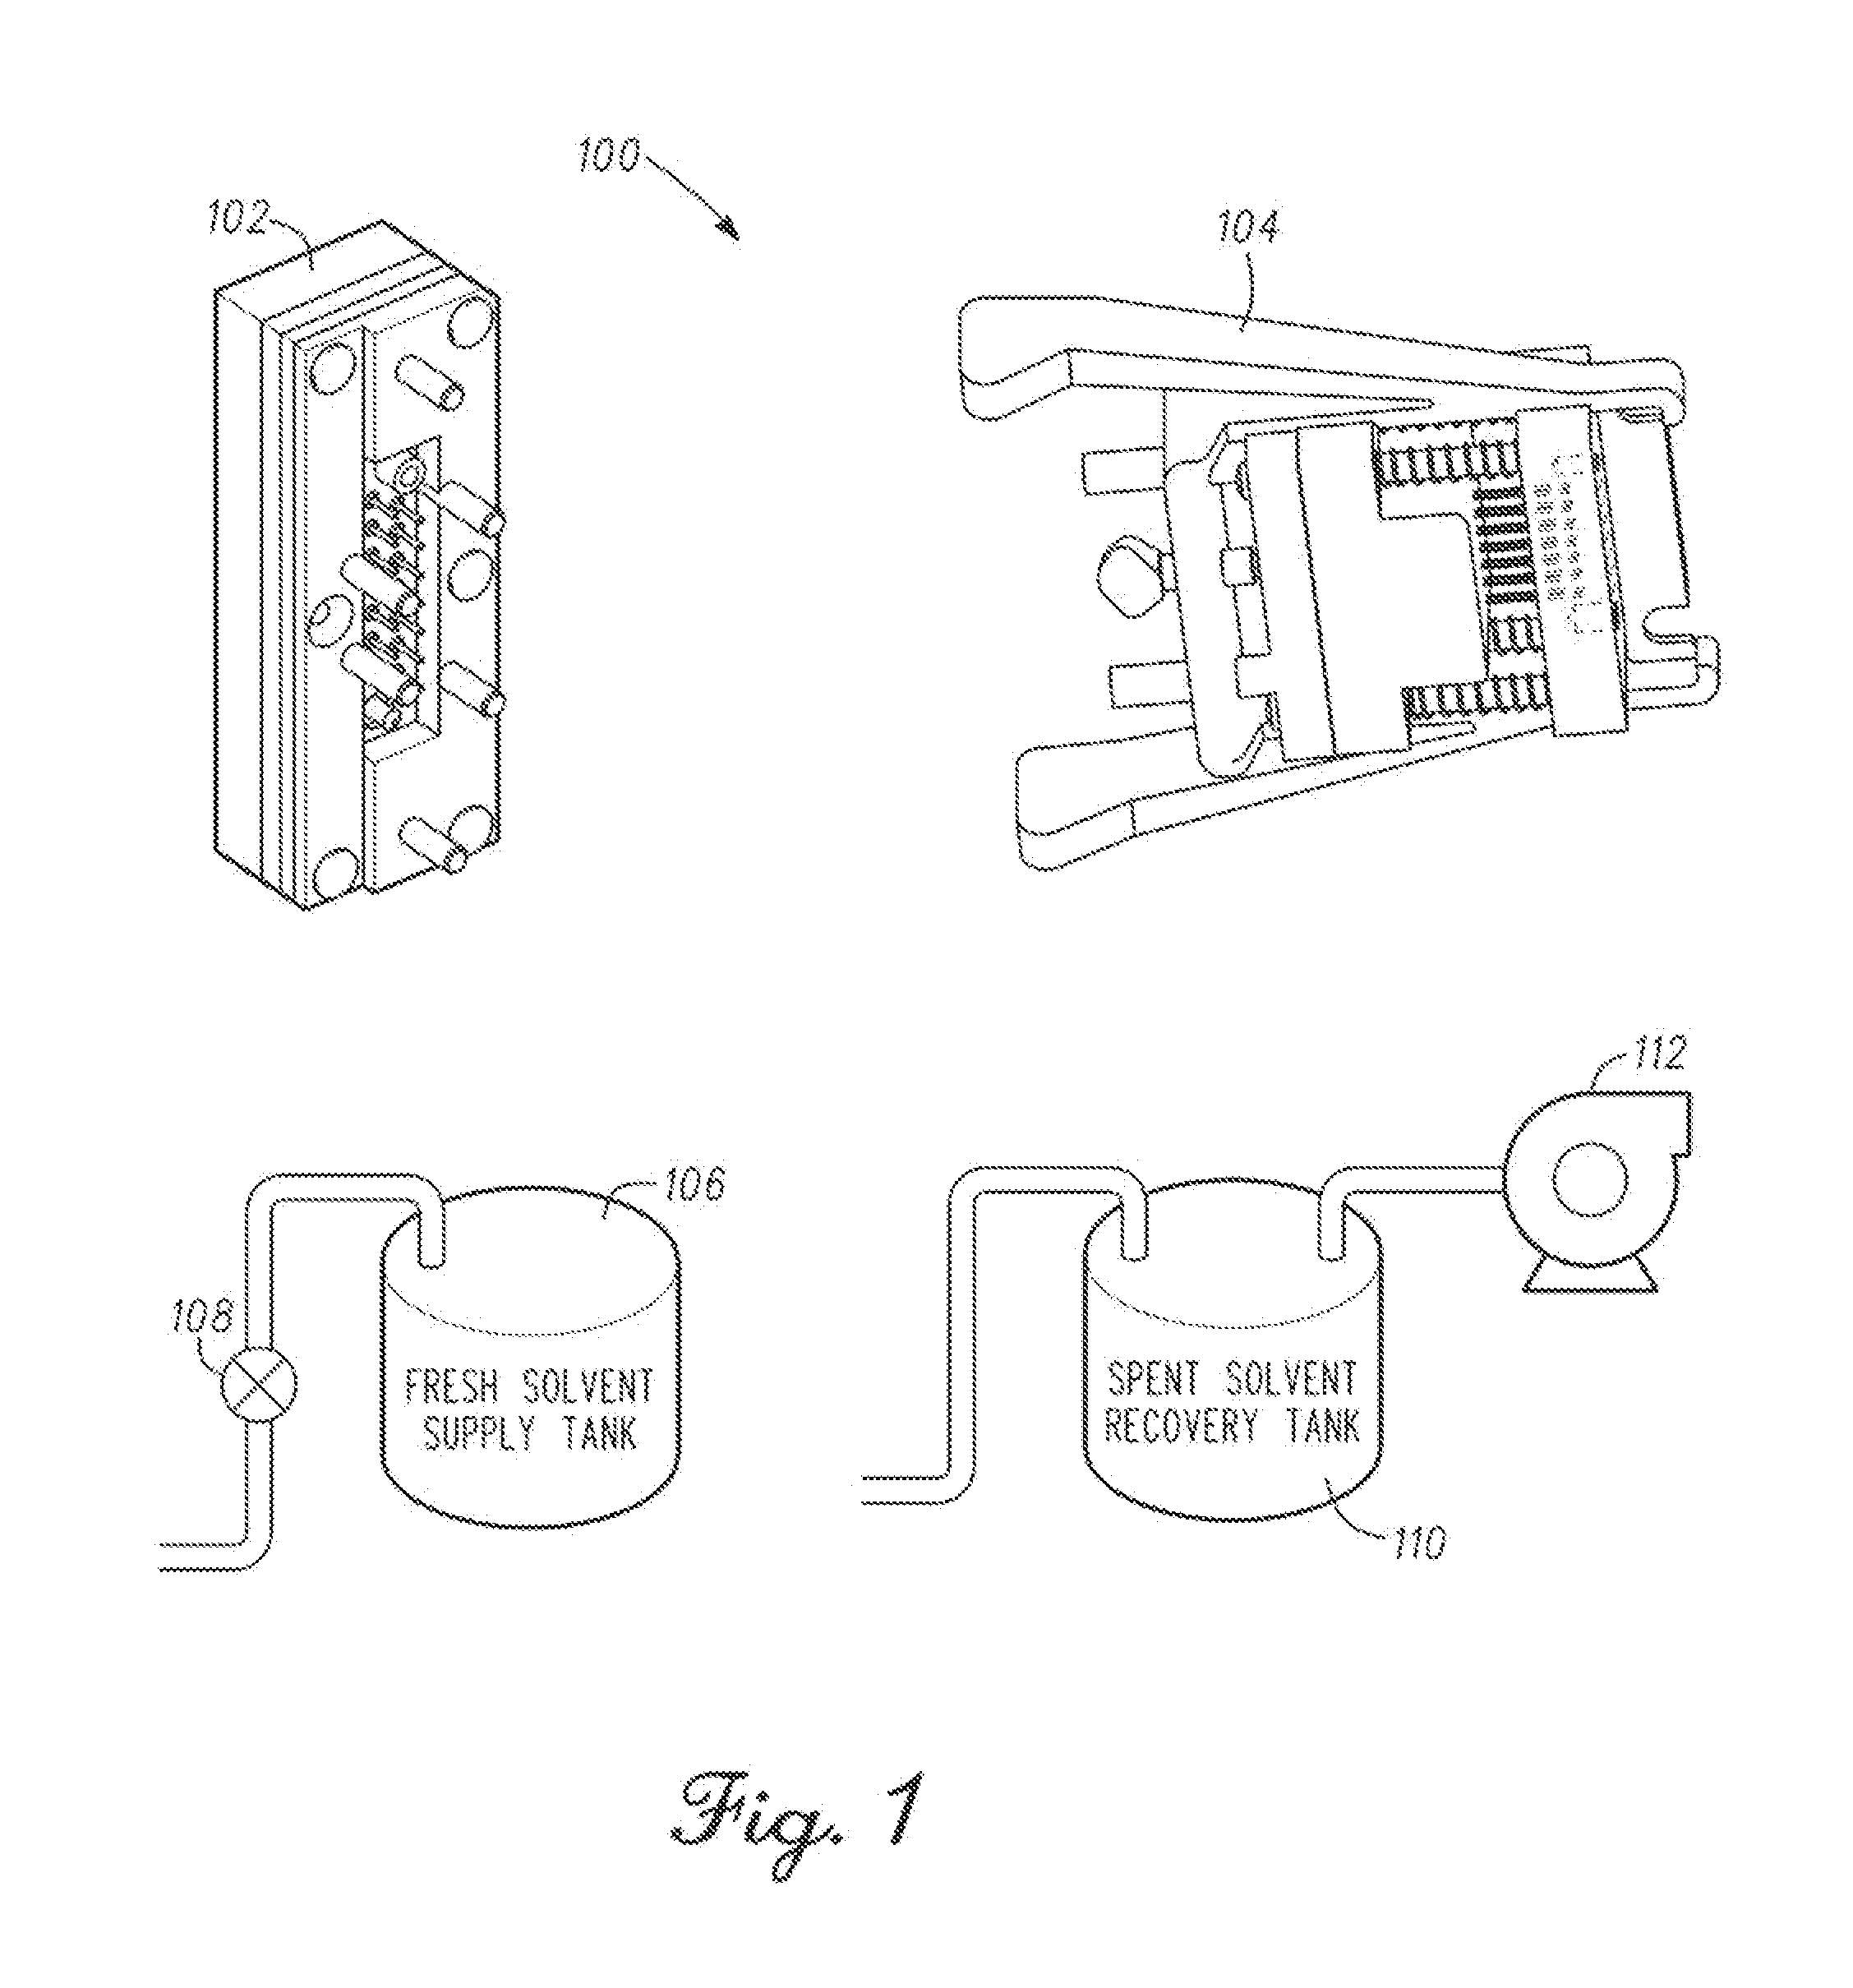 Receptacle cleaning systems and methods for the same